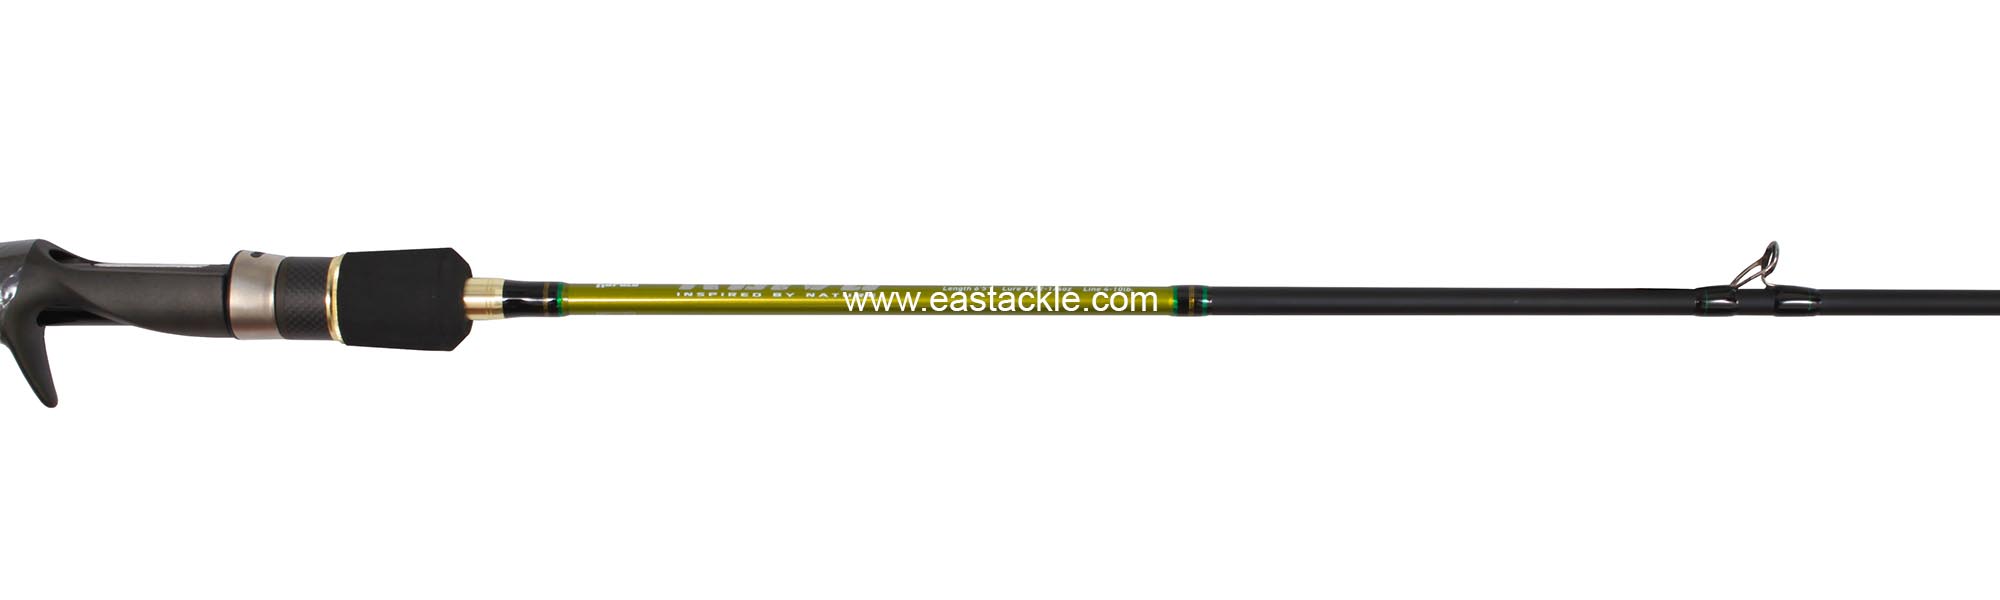 Rapala - Koivu - KVC652L - Bait Casting Rod - Reel Seat Fore Grip to Stripper Guide (Side View) | Eastackle